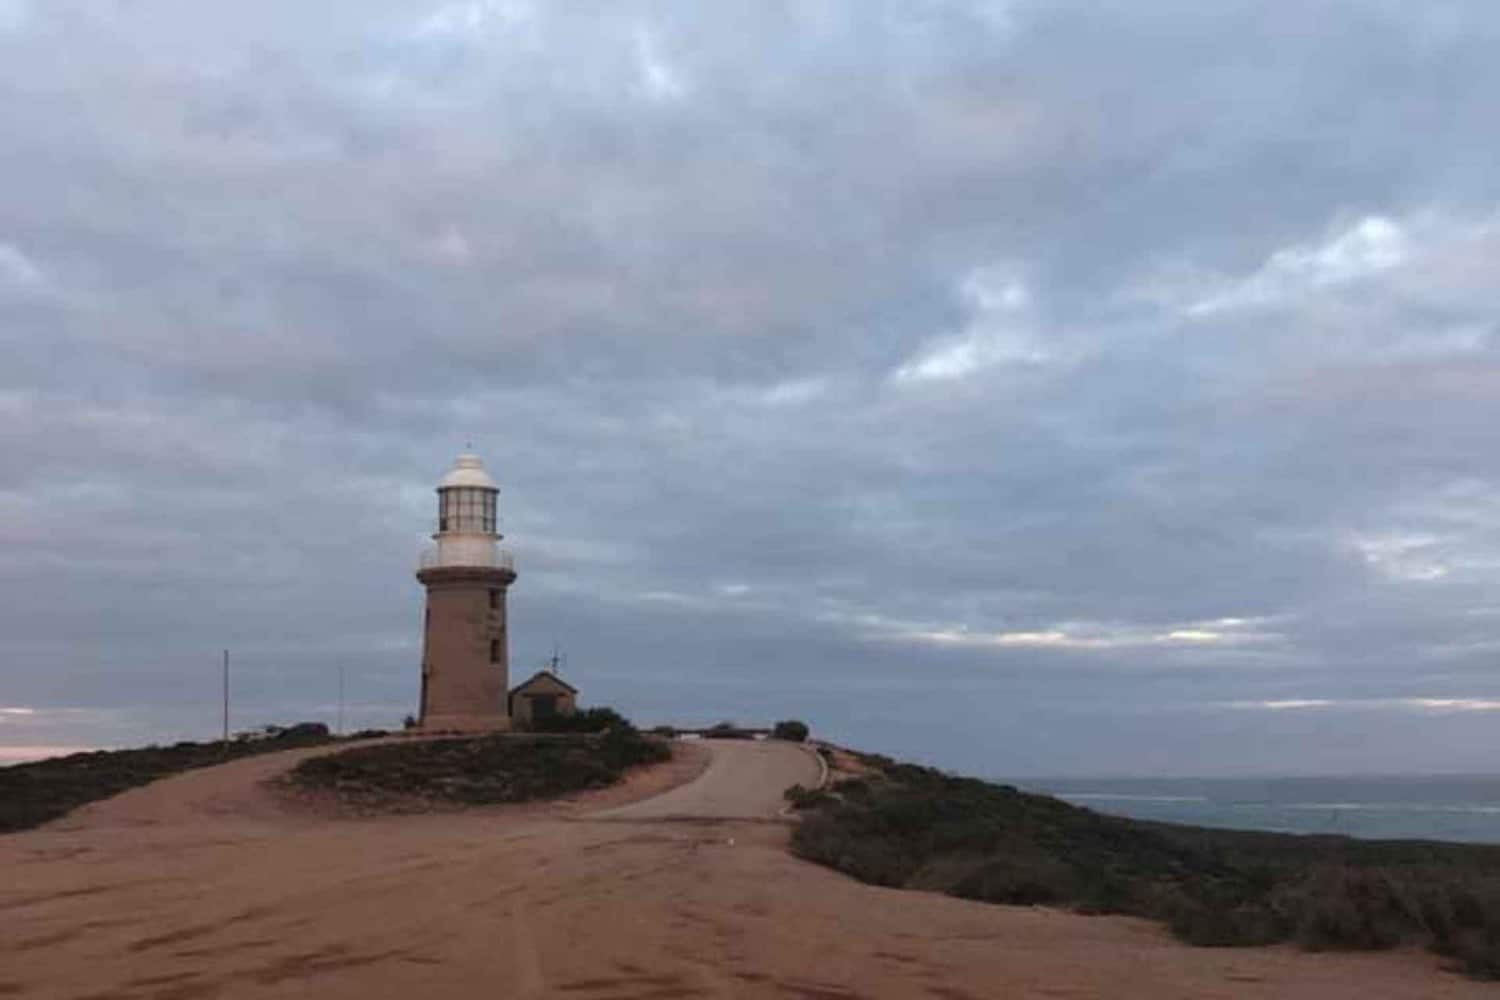 Iconic Exmouth lighthouse standing tall against a backdrop of a cloudy sky, symbolizing guidance and safety for mariners along the coast